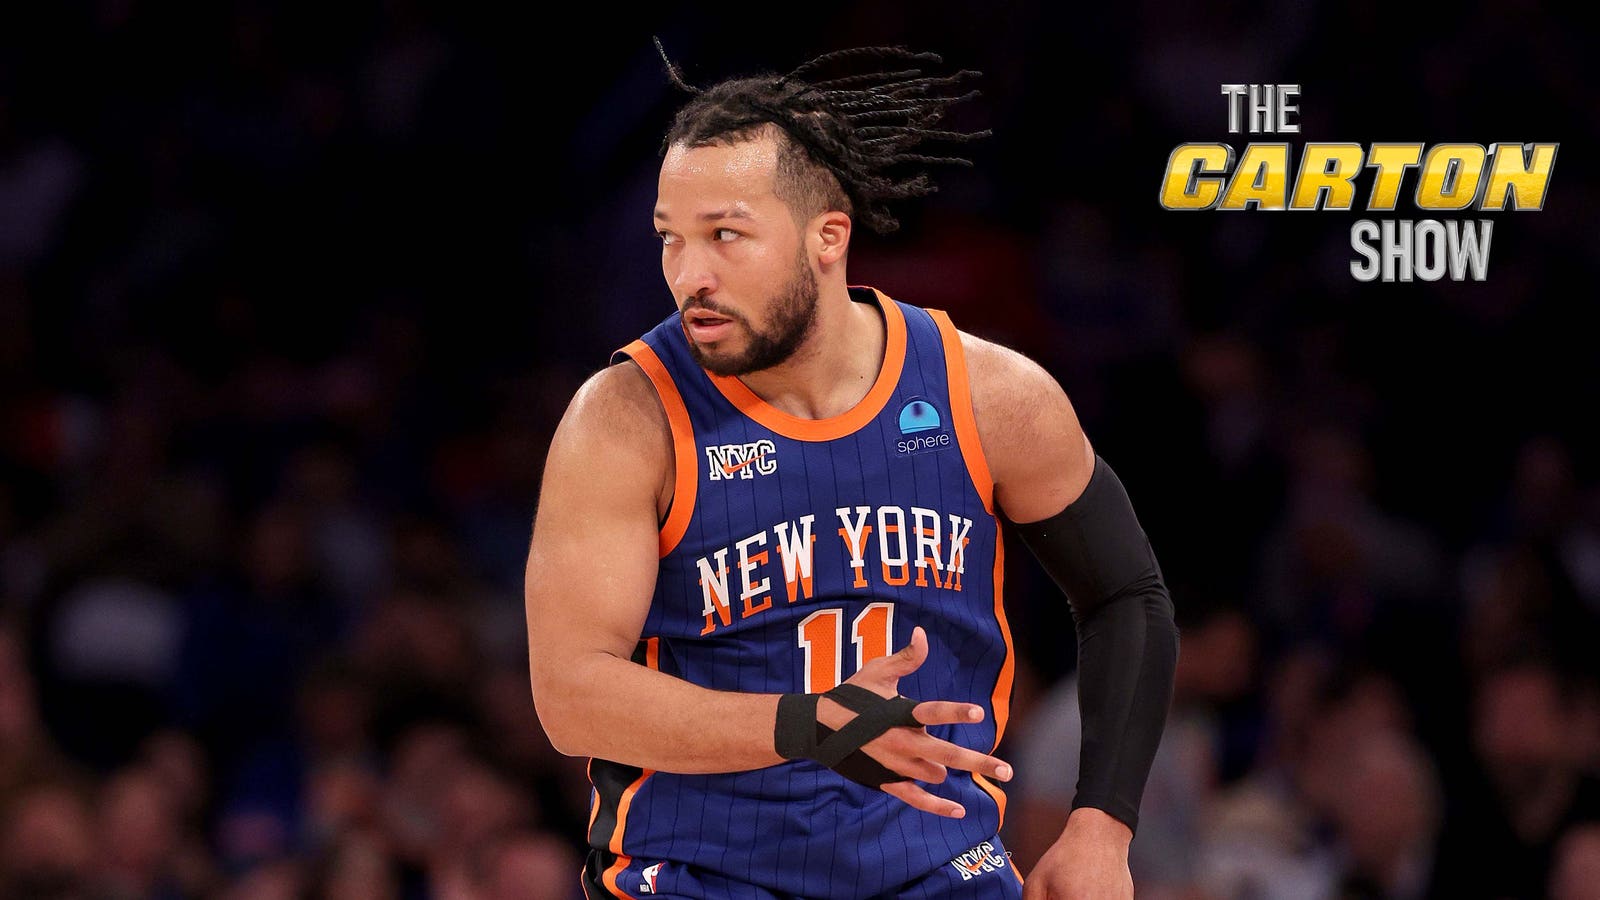 Is Jalen Brunson the best player in the Knicks vs. 76ers series?